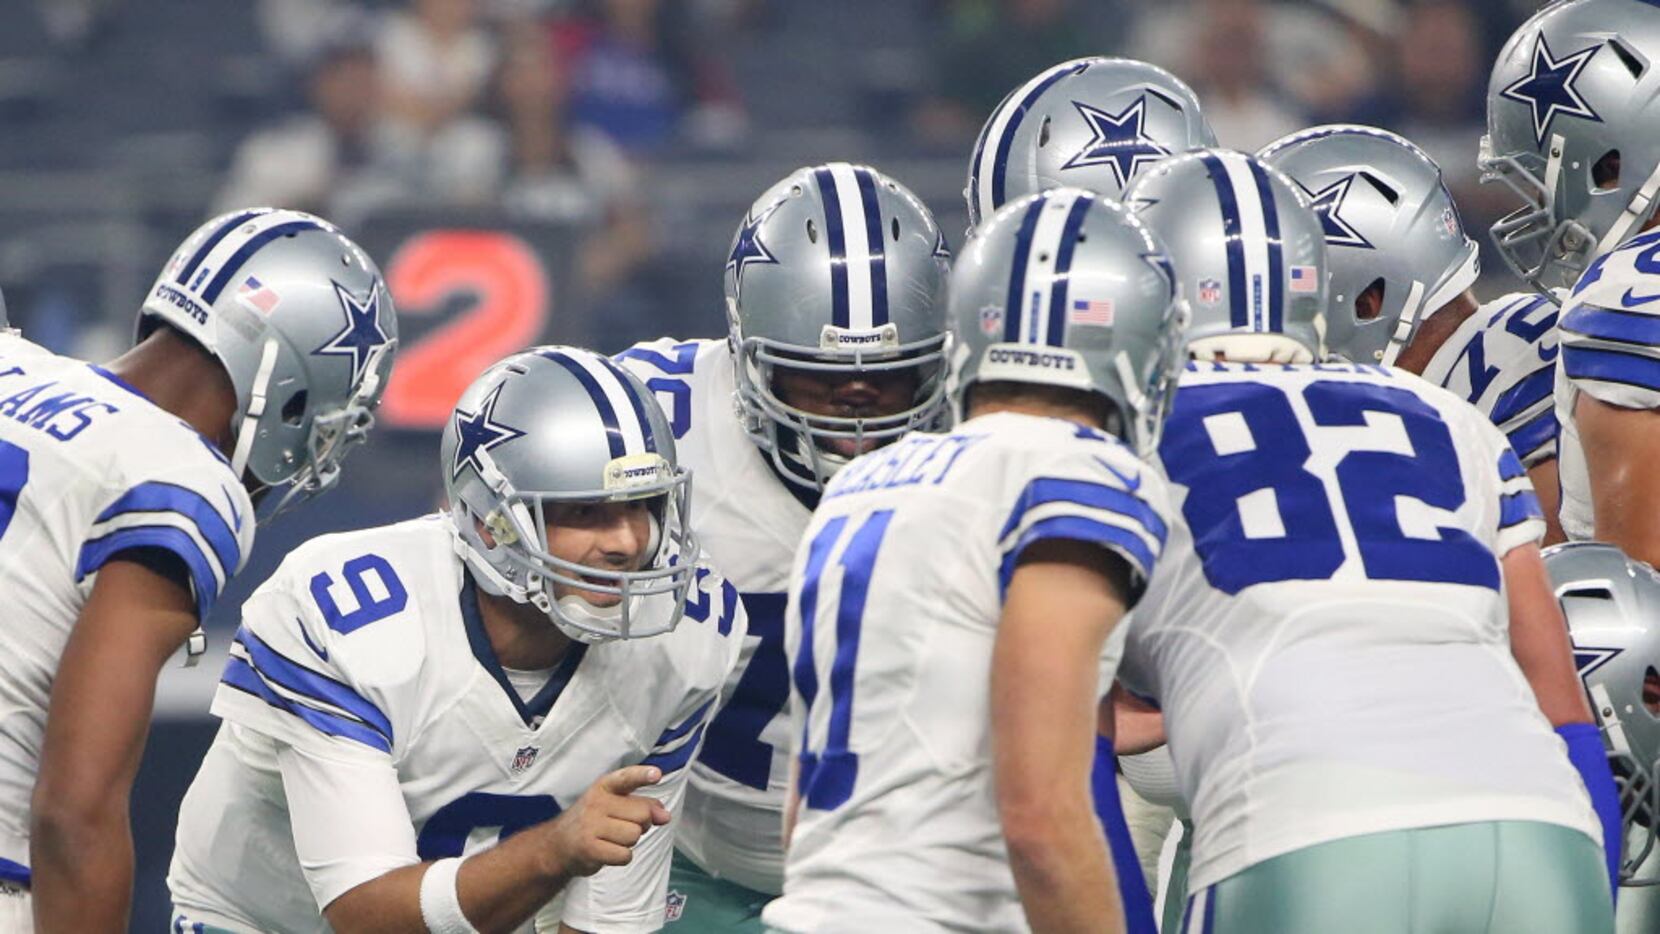 Dallas Cowboys quarterback Tony Romo (9) speaks in the huddle in the first quarter during a...